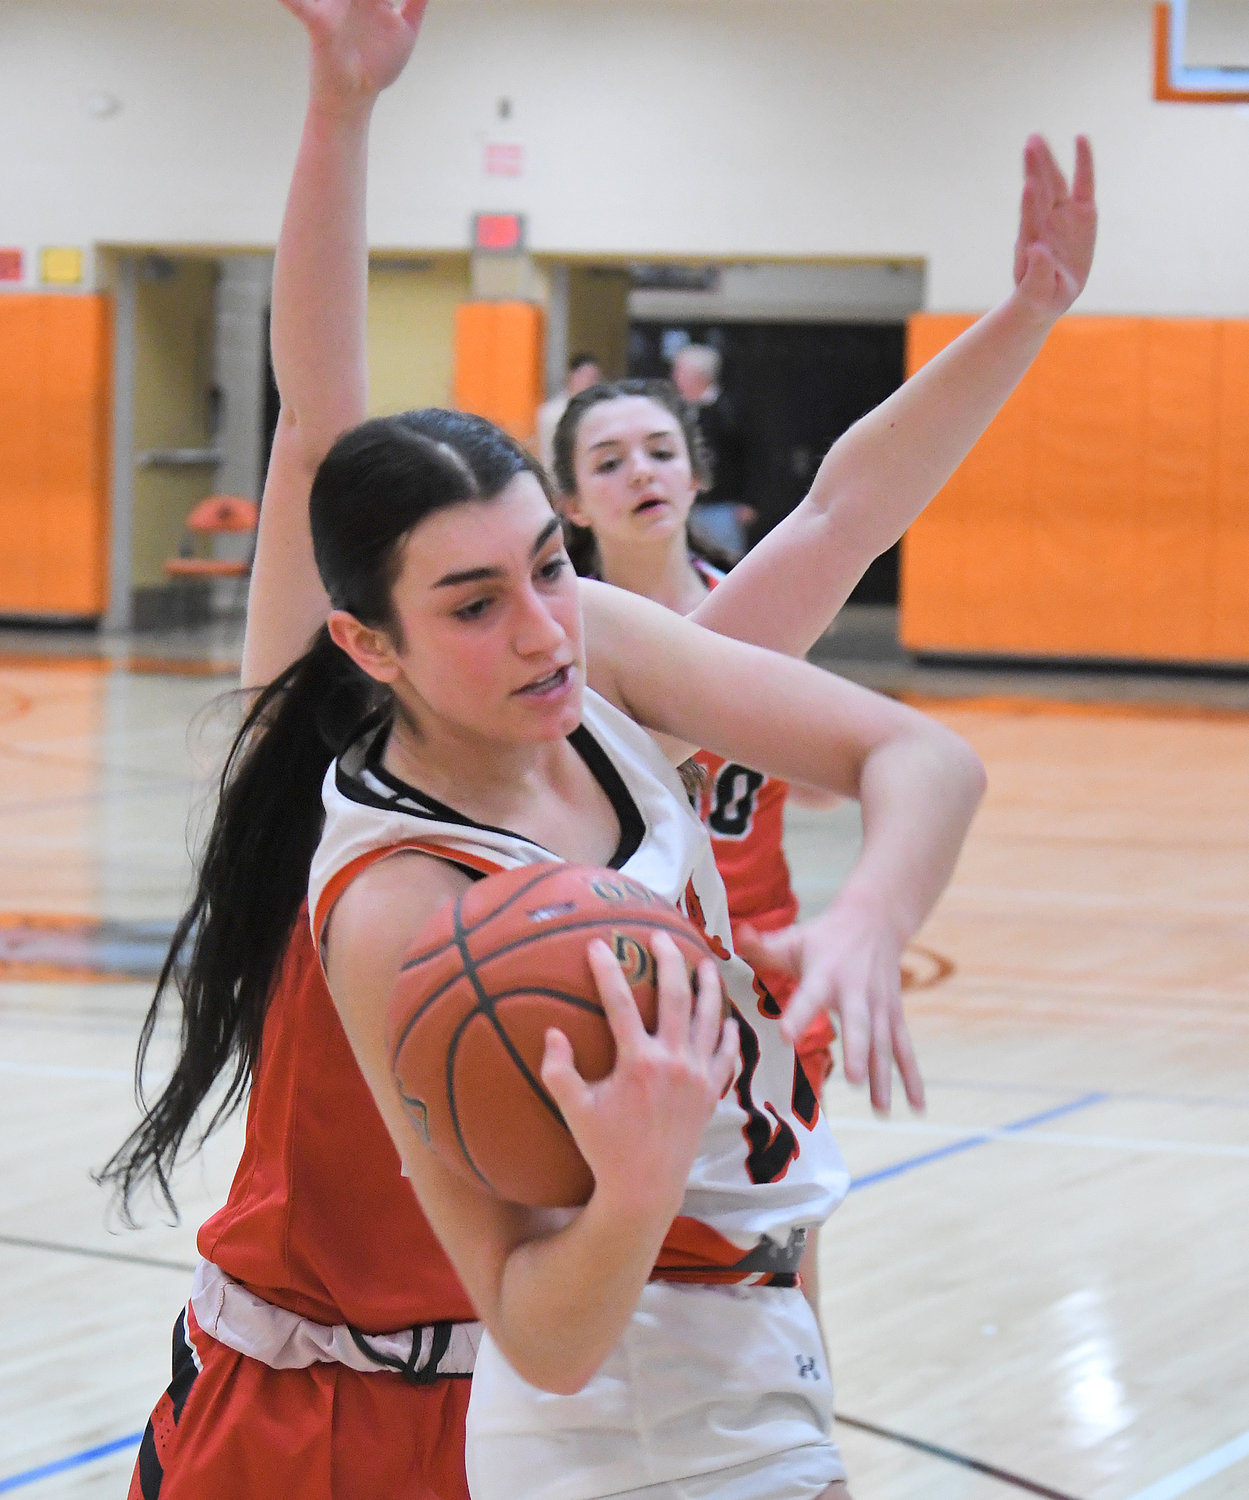 Mia Mirabelli of Rome Free Academy grabs a rebound while guarded by Vernon-Verona-Sherrill's Bailey Faldzinski in the first quarter Monday night at RFA. Mirabelli put up 14 points in a 66-24 win.